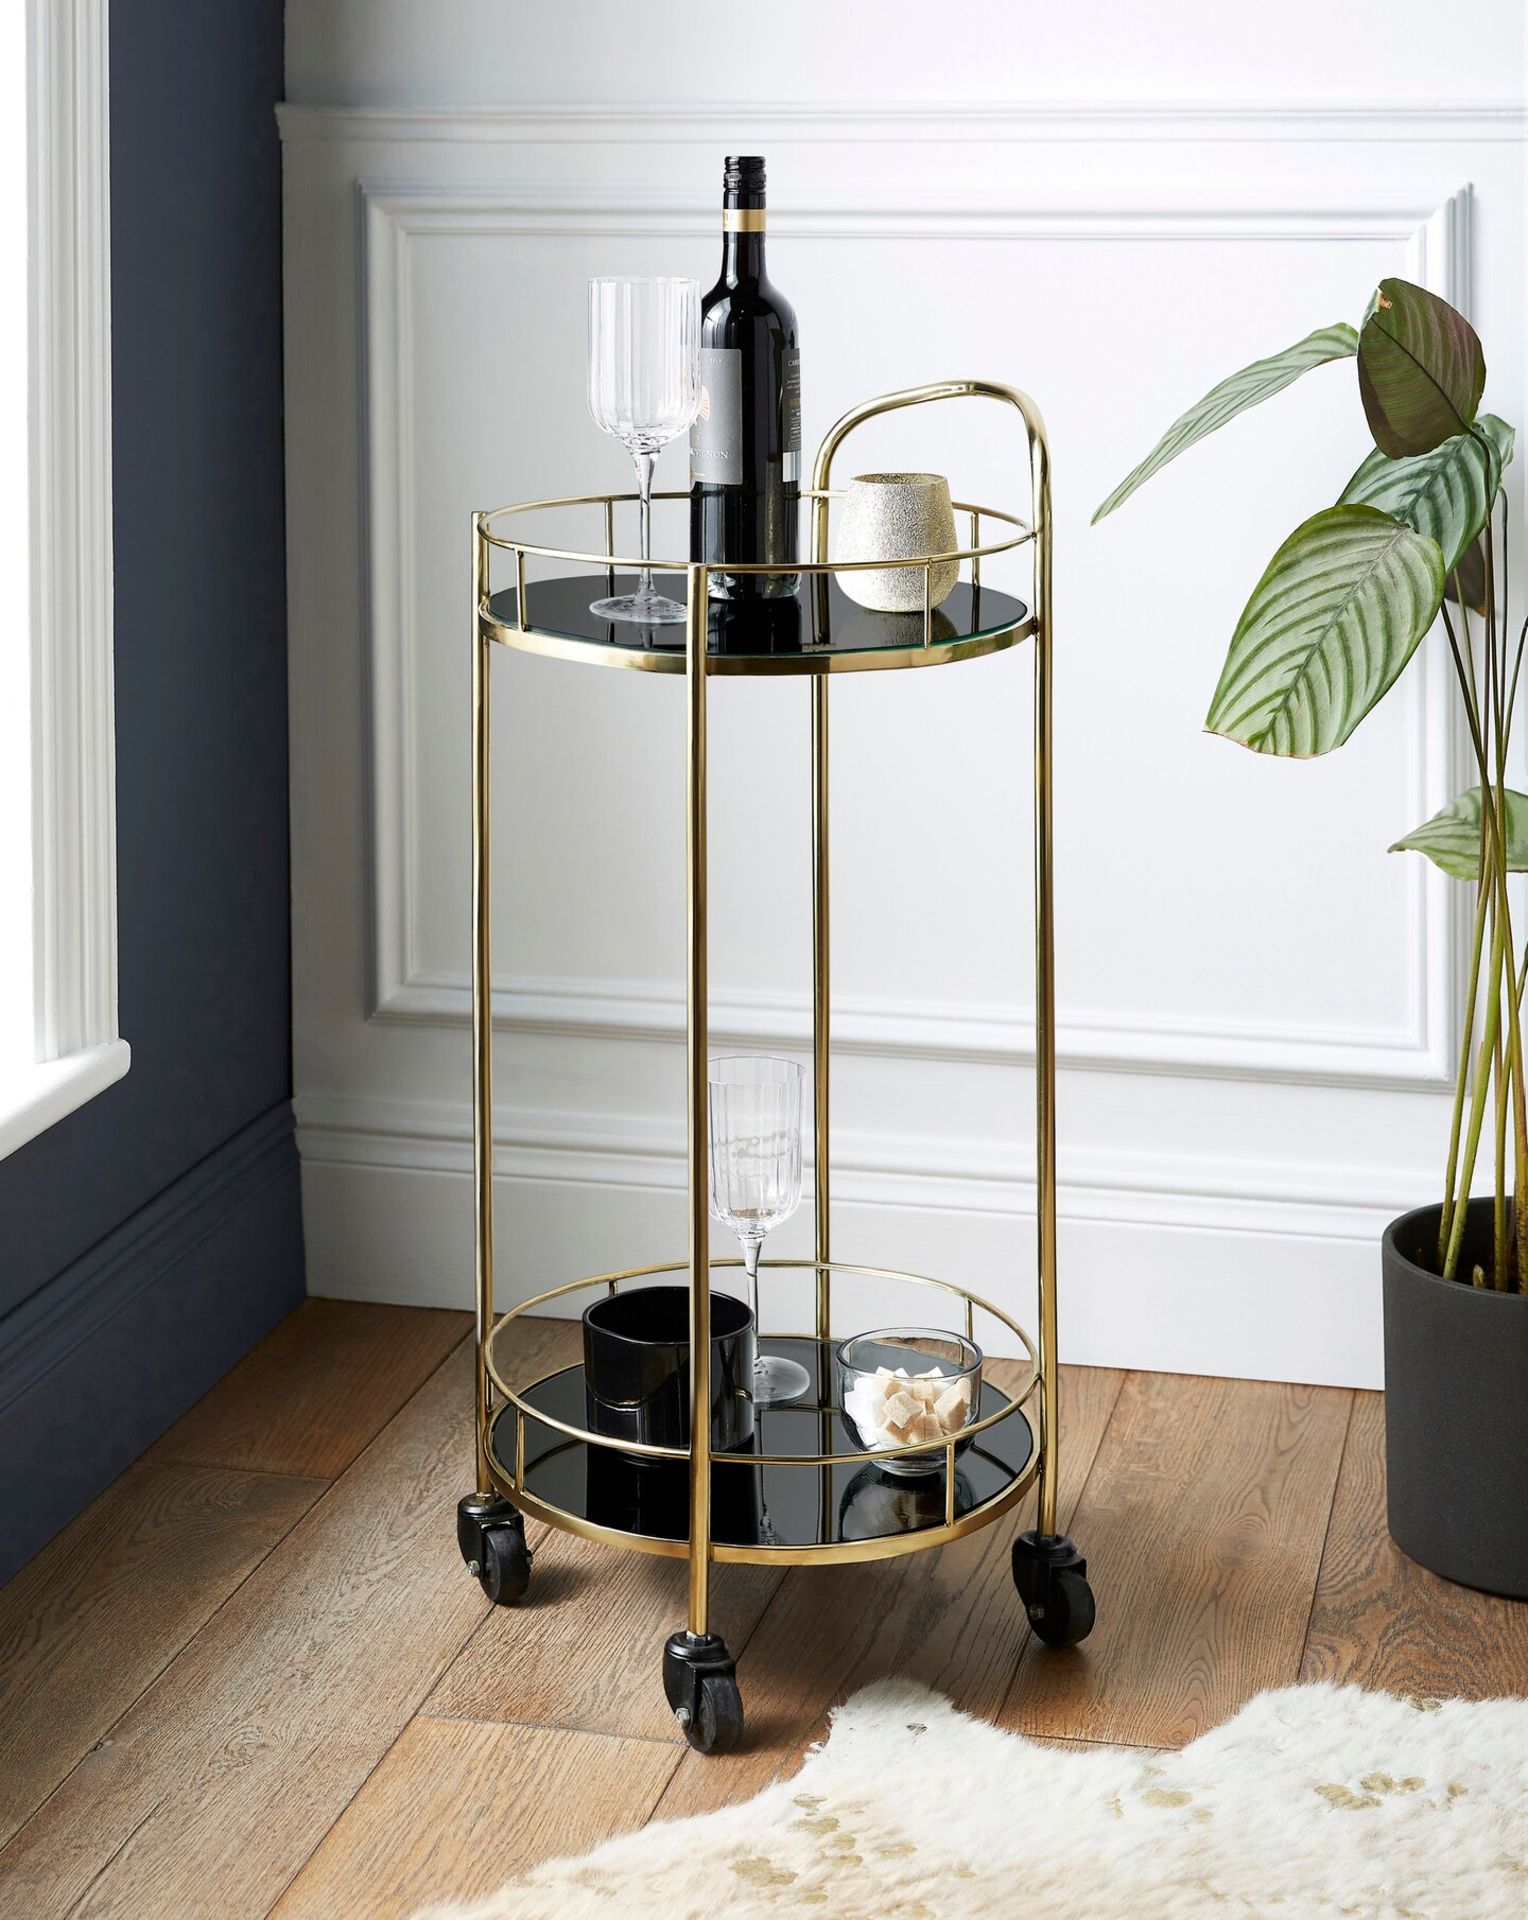 BRAND NEW CARINA CIRCULAR DRINKS TROLLEY RRP £219, Perfect for hosting dinner parties or for a